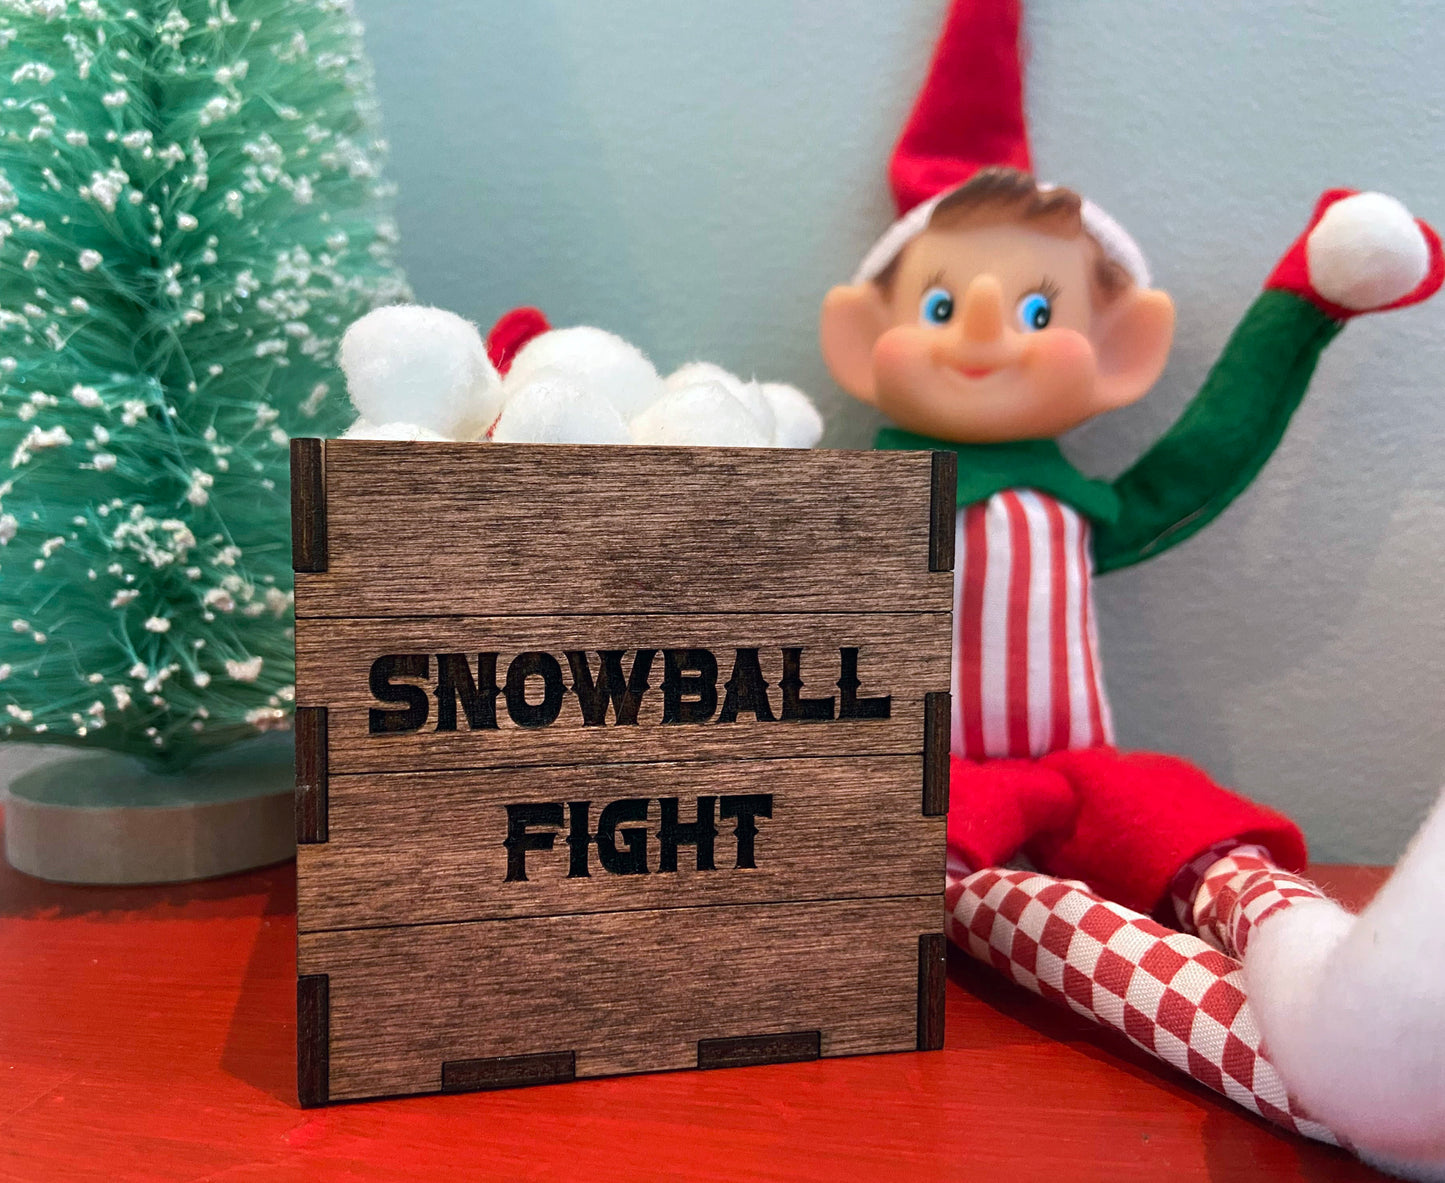 Christmas Elf Kit #1 - Props and Signs (Ready to Paint)